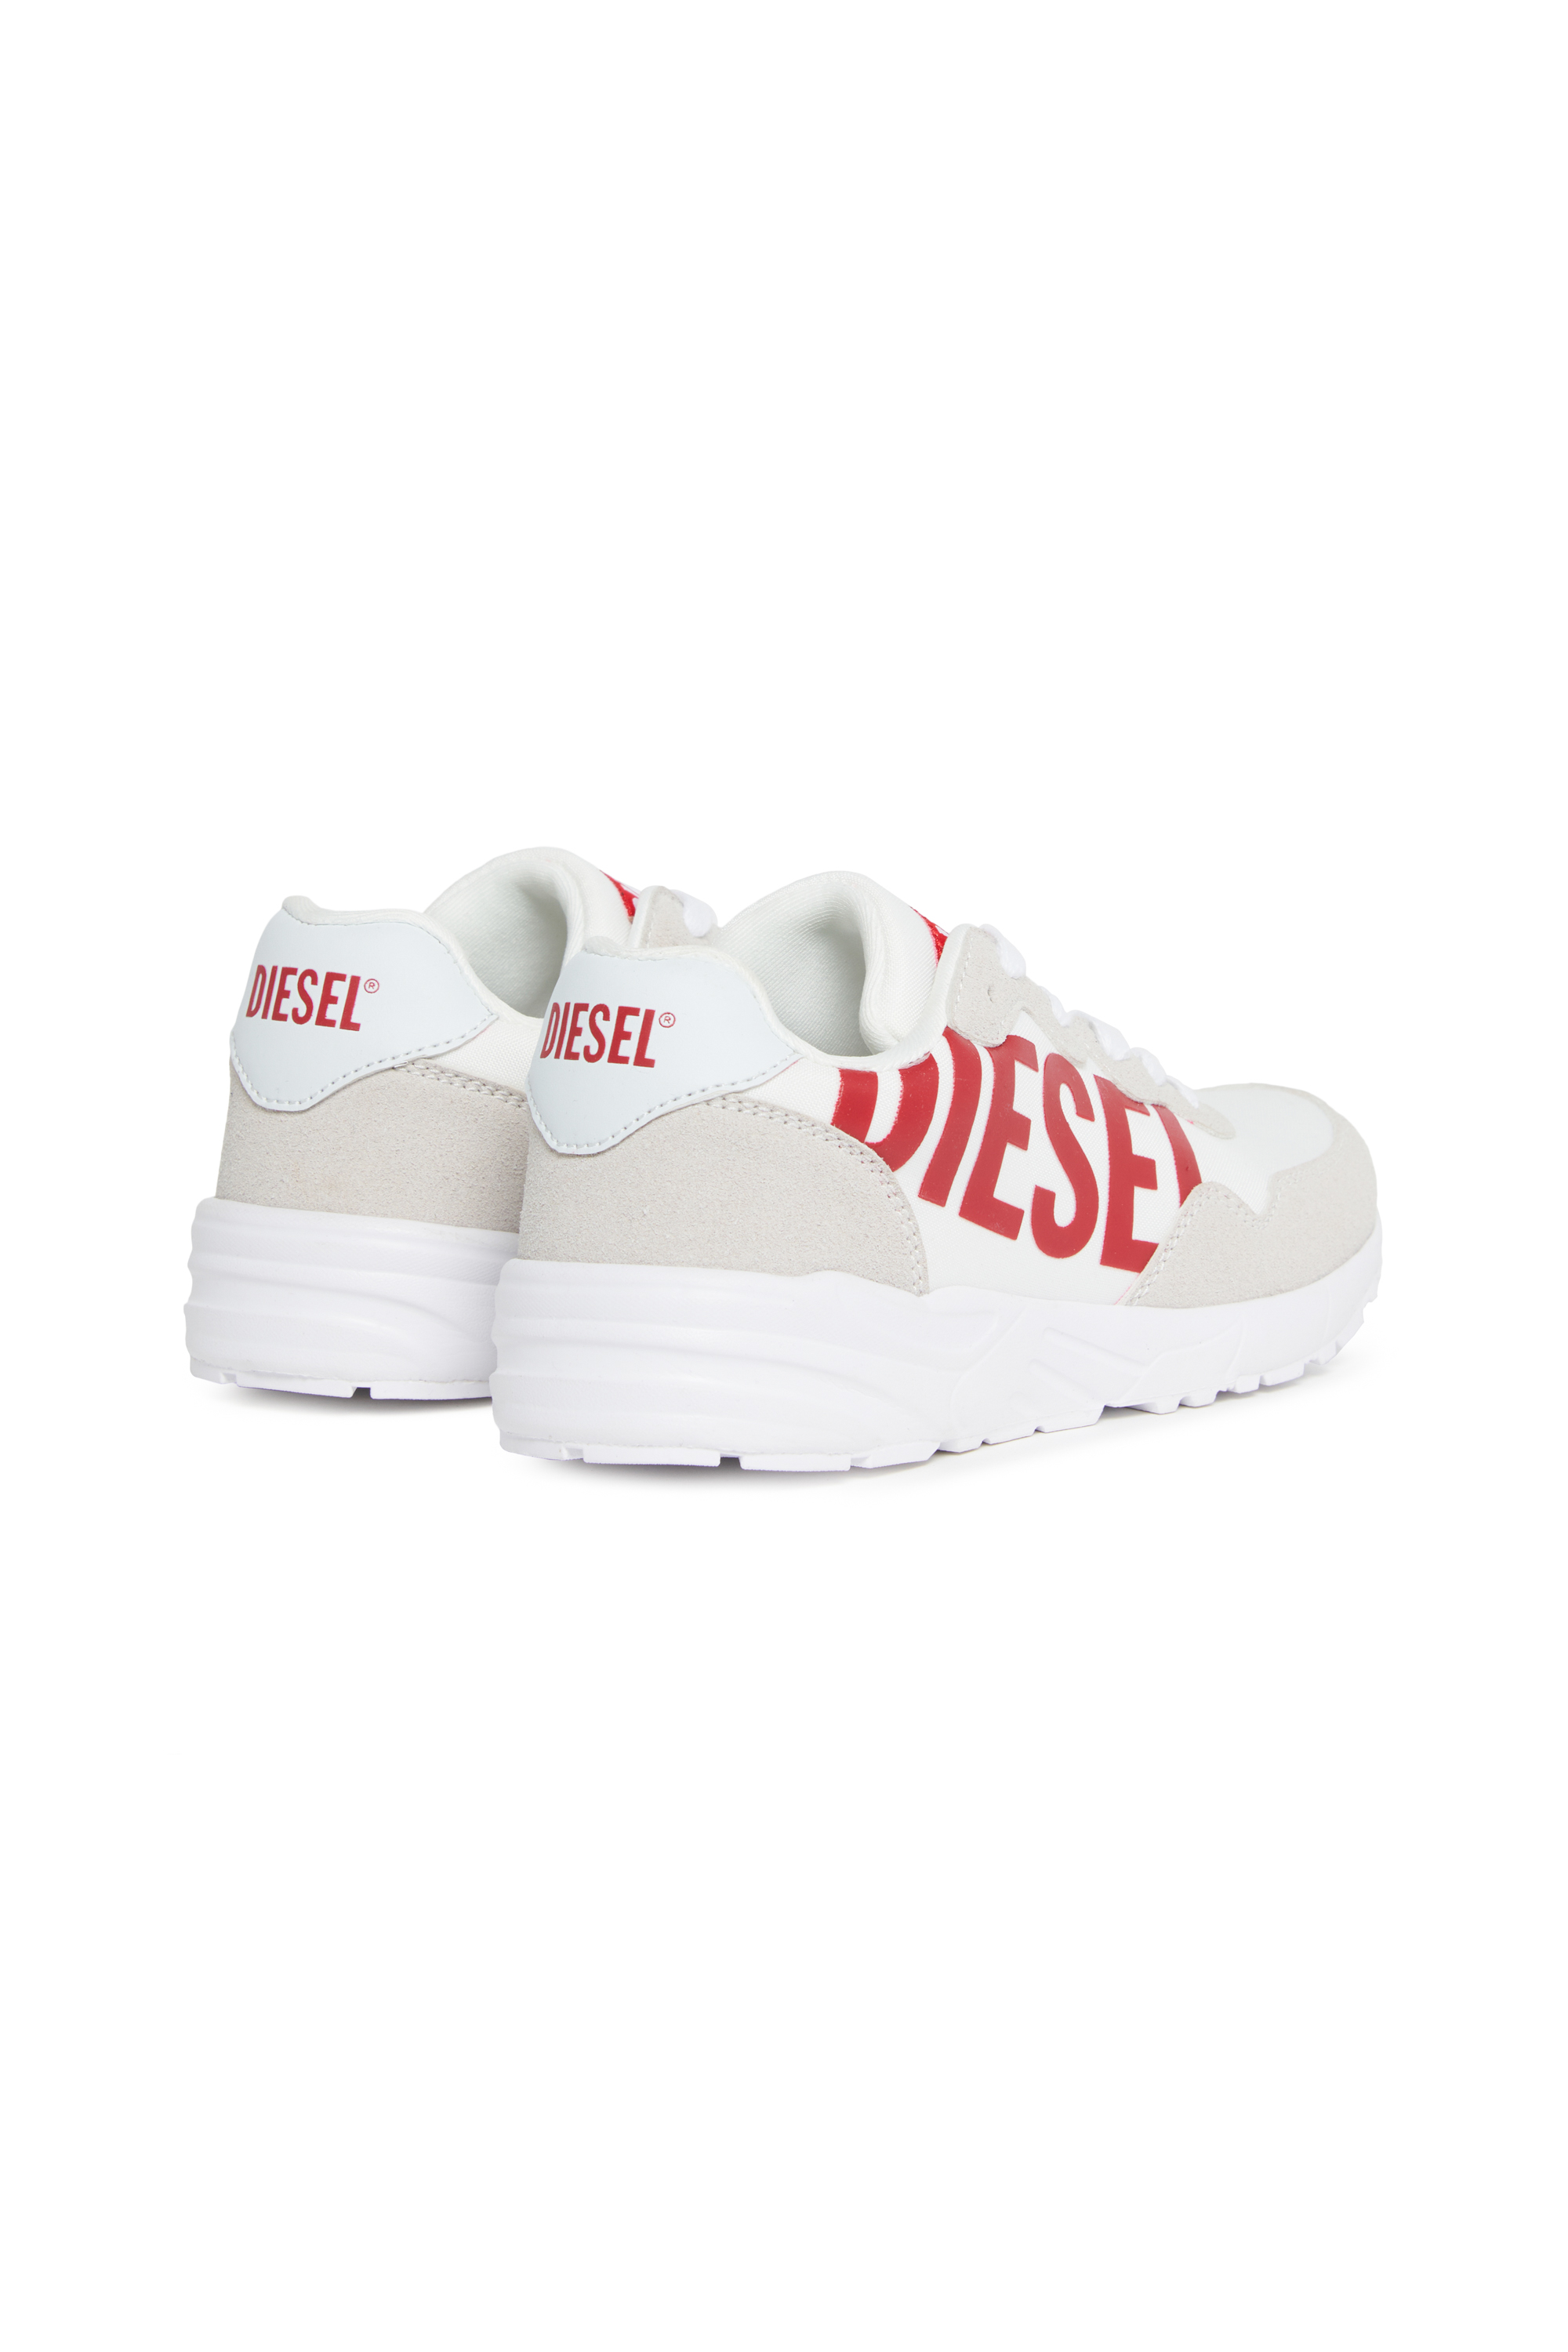 Diesel - S-STAR LIGHT LC, Weiss/Rot - Image 3